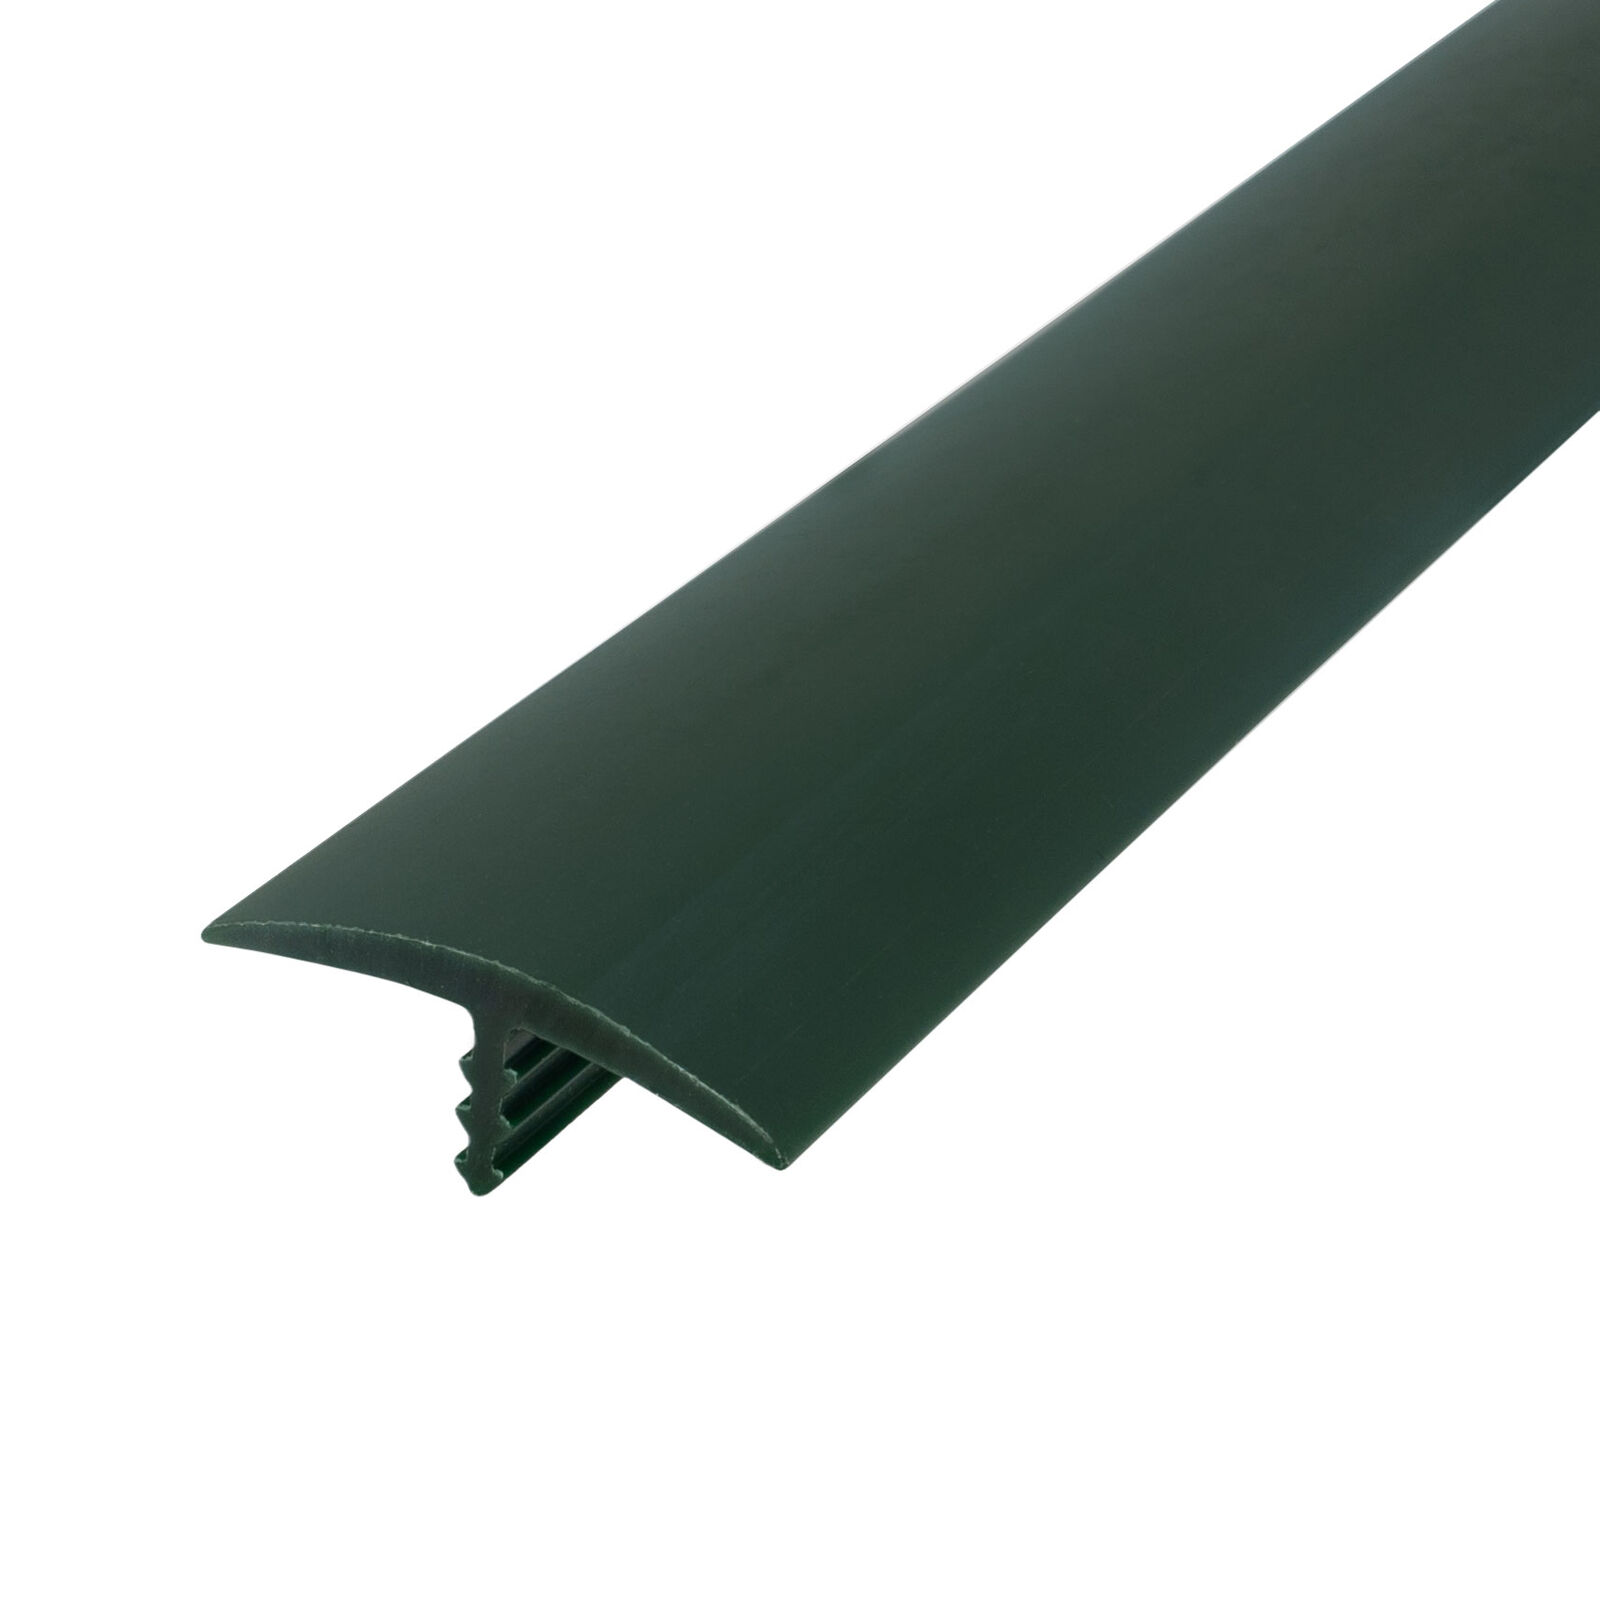 Outwater Plastic T-molding 1-1/8 Inch Seaweed Green Flexible Polyethylene Center